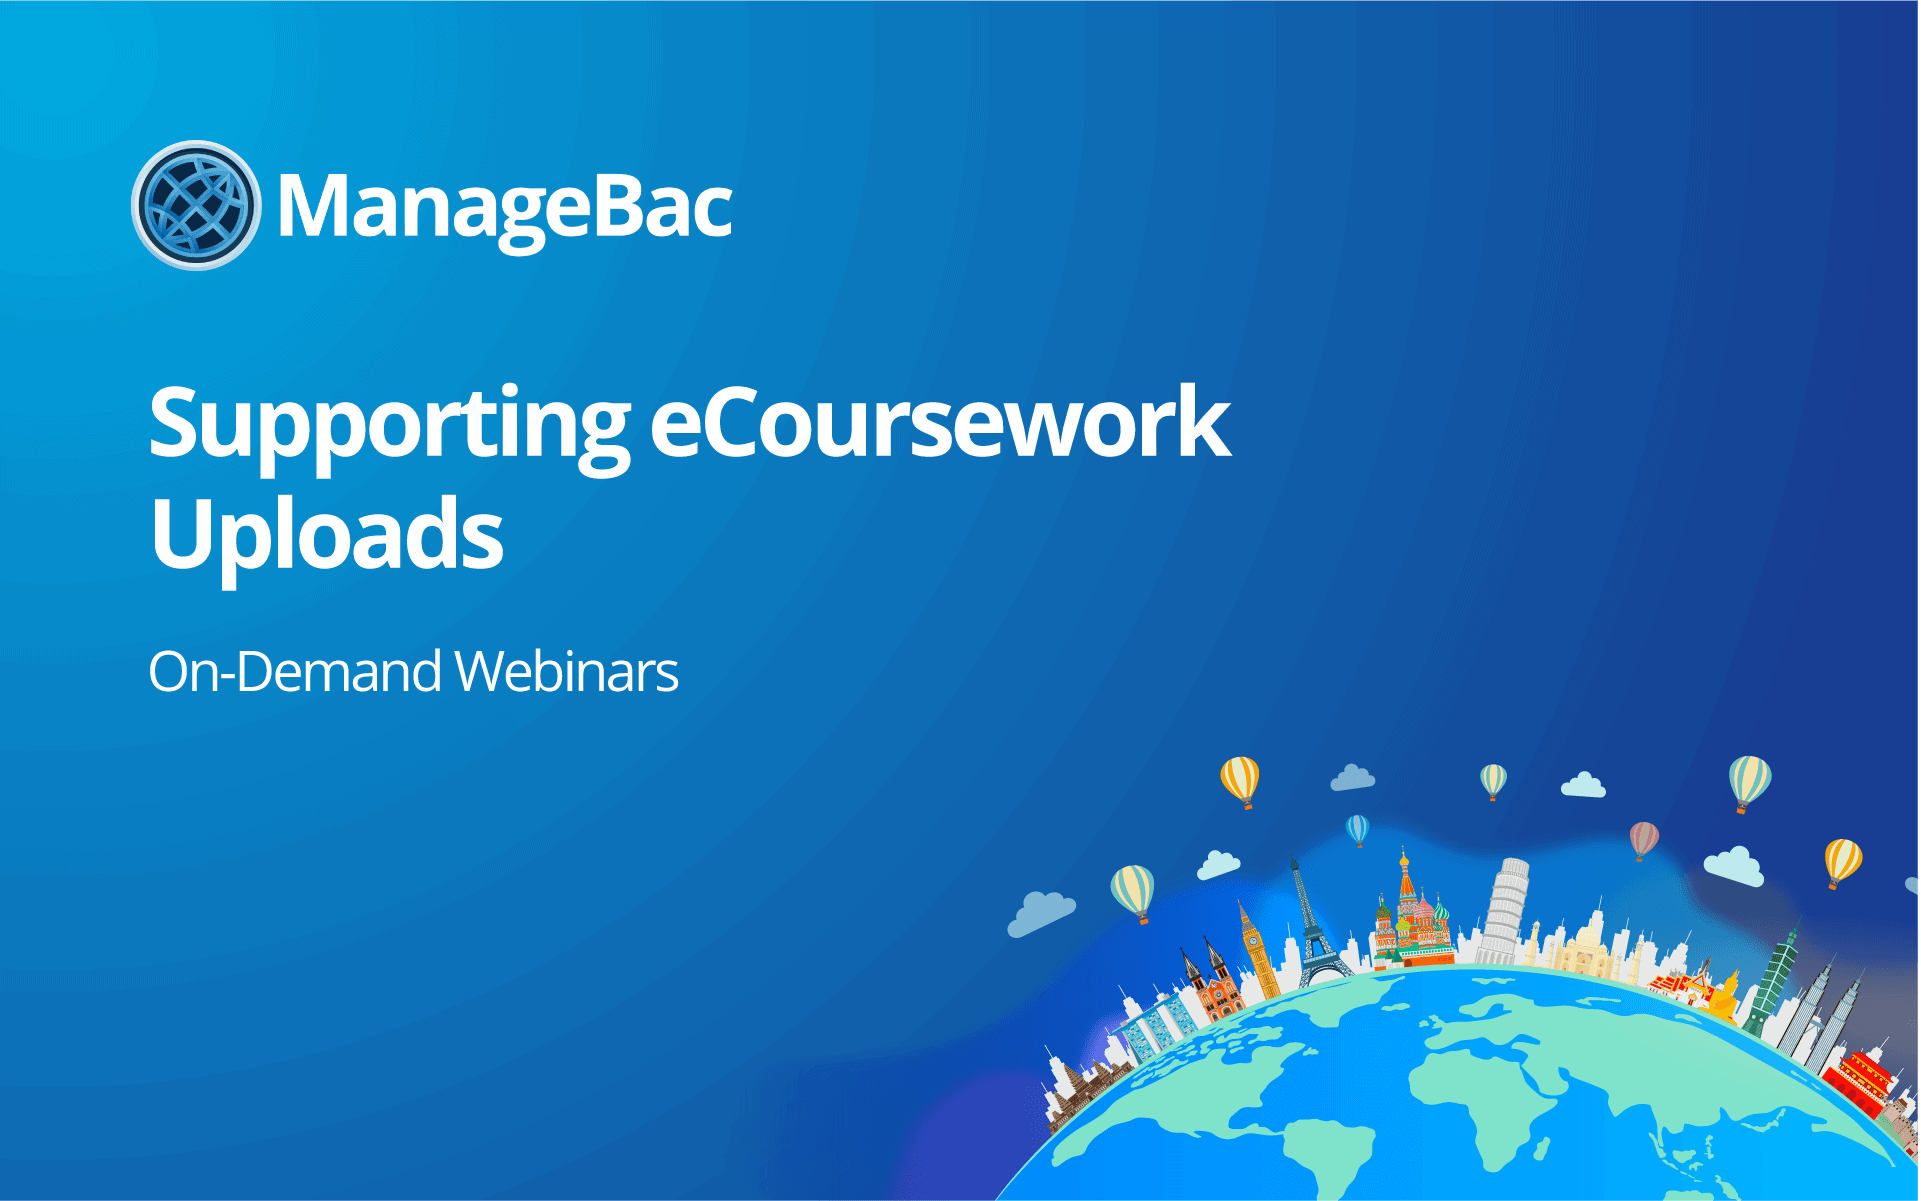 Supporting eCoursework Uploads with ManageBac